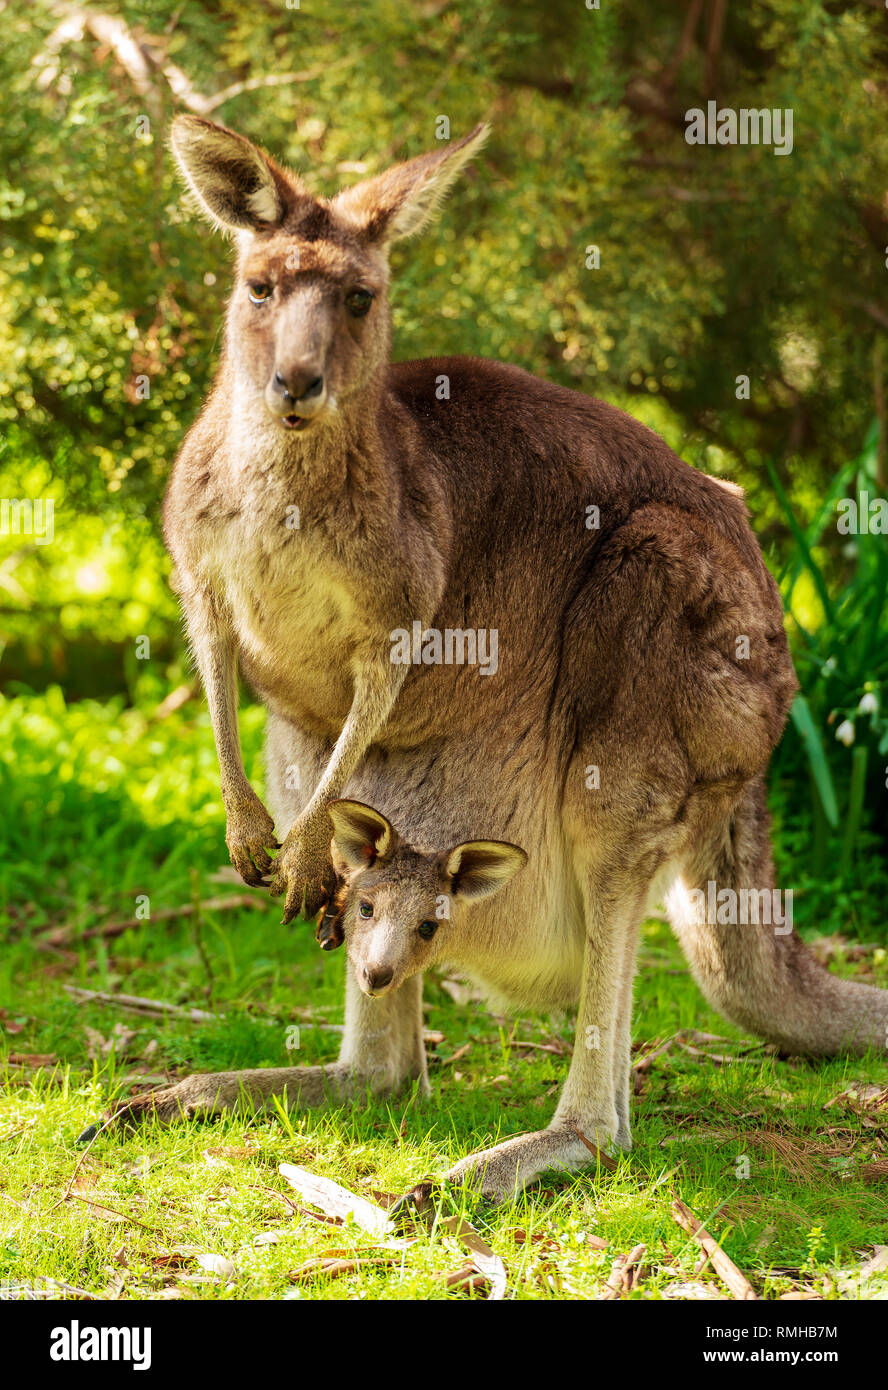 Mother kangaroo with baby joey in her pouch in the wild in The Grampians, Australia Stock Photo